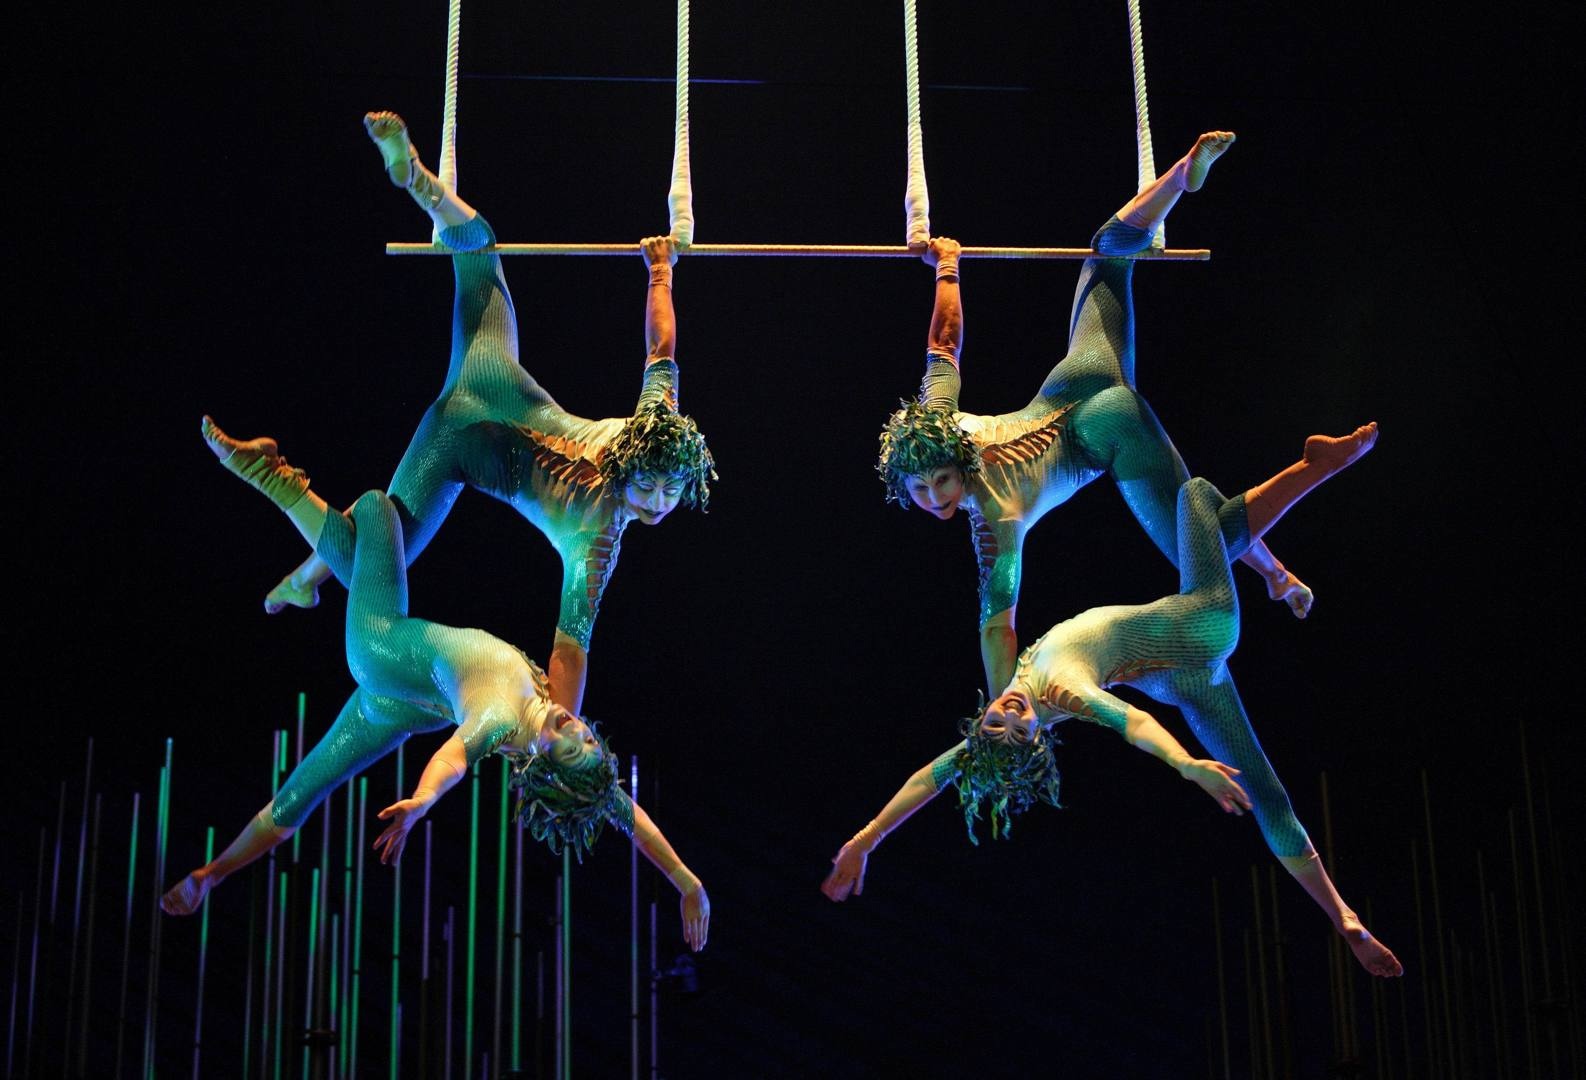 Four person trapeze act